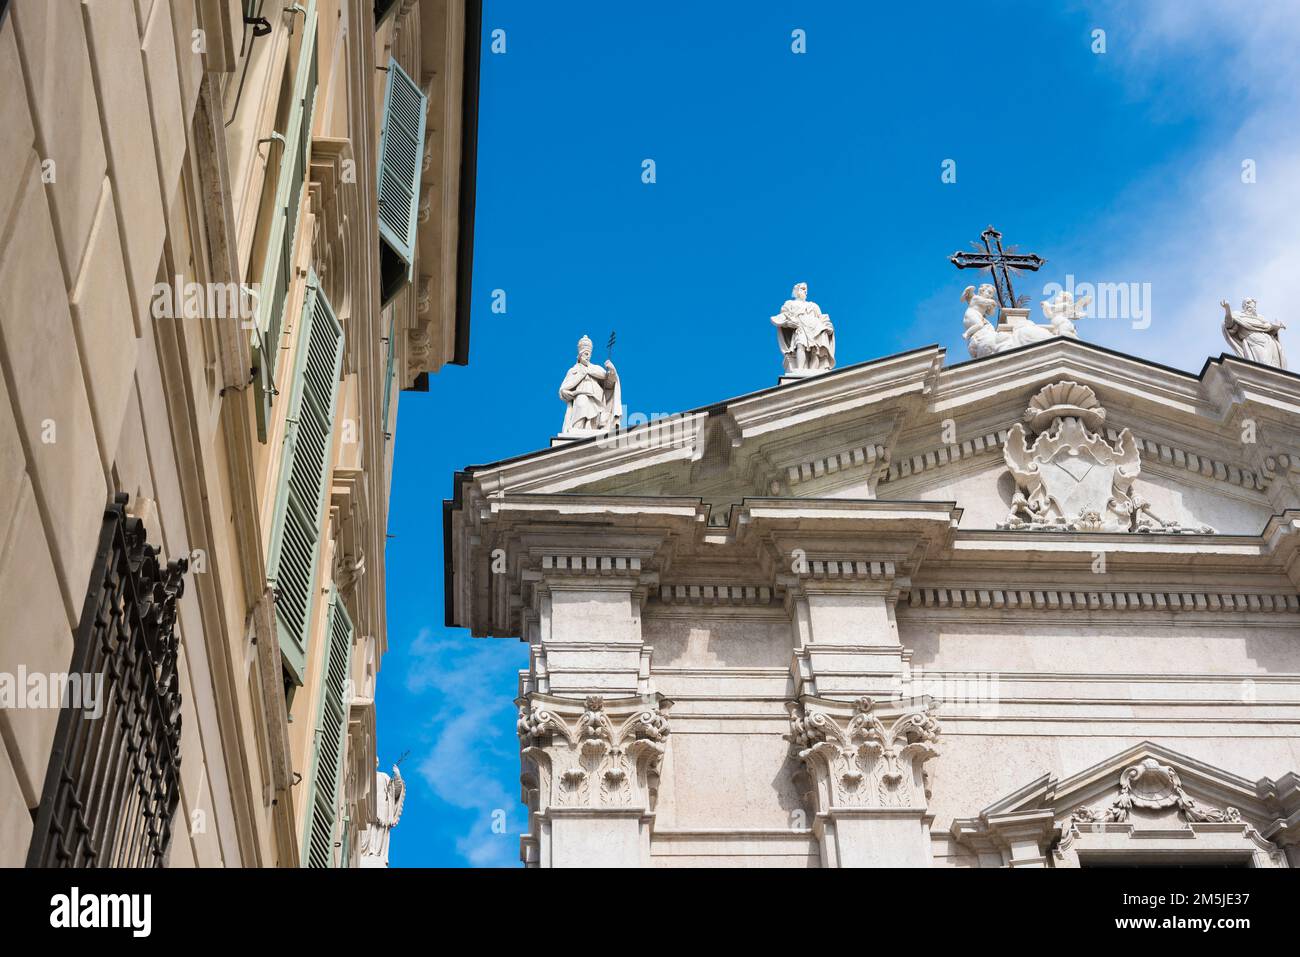 Italy Baroque, view of a section of the decorated pediment of the Baroque facade of the entrance to the Cattedrale di San Pietro in Mantua, Italy Stock Photo